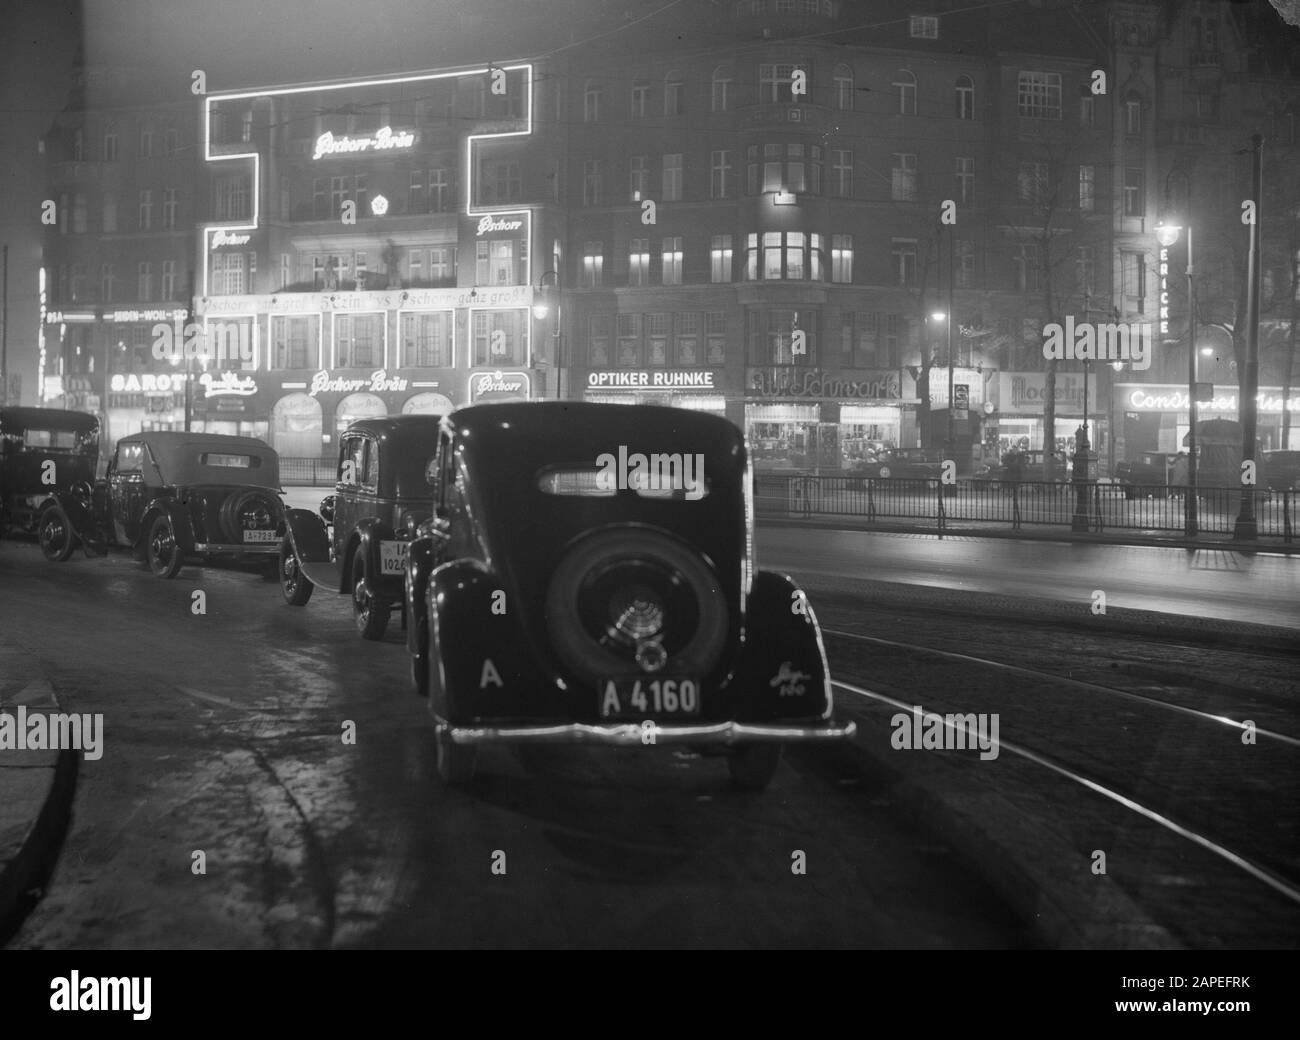 Reportage Berlin Description: Berlin. Night shooting of the Tauentzienstrasse with the illuminated facade of the cafe-restaurant Pschorr-Brau and packed cars Date: November 1935 Location: Berlin, Germany Keywords: cafes, advertising, restaurants, cityscape Stock Photo